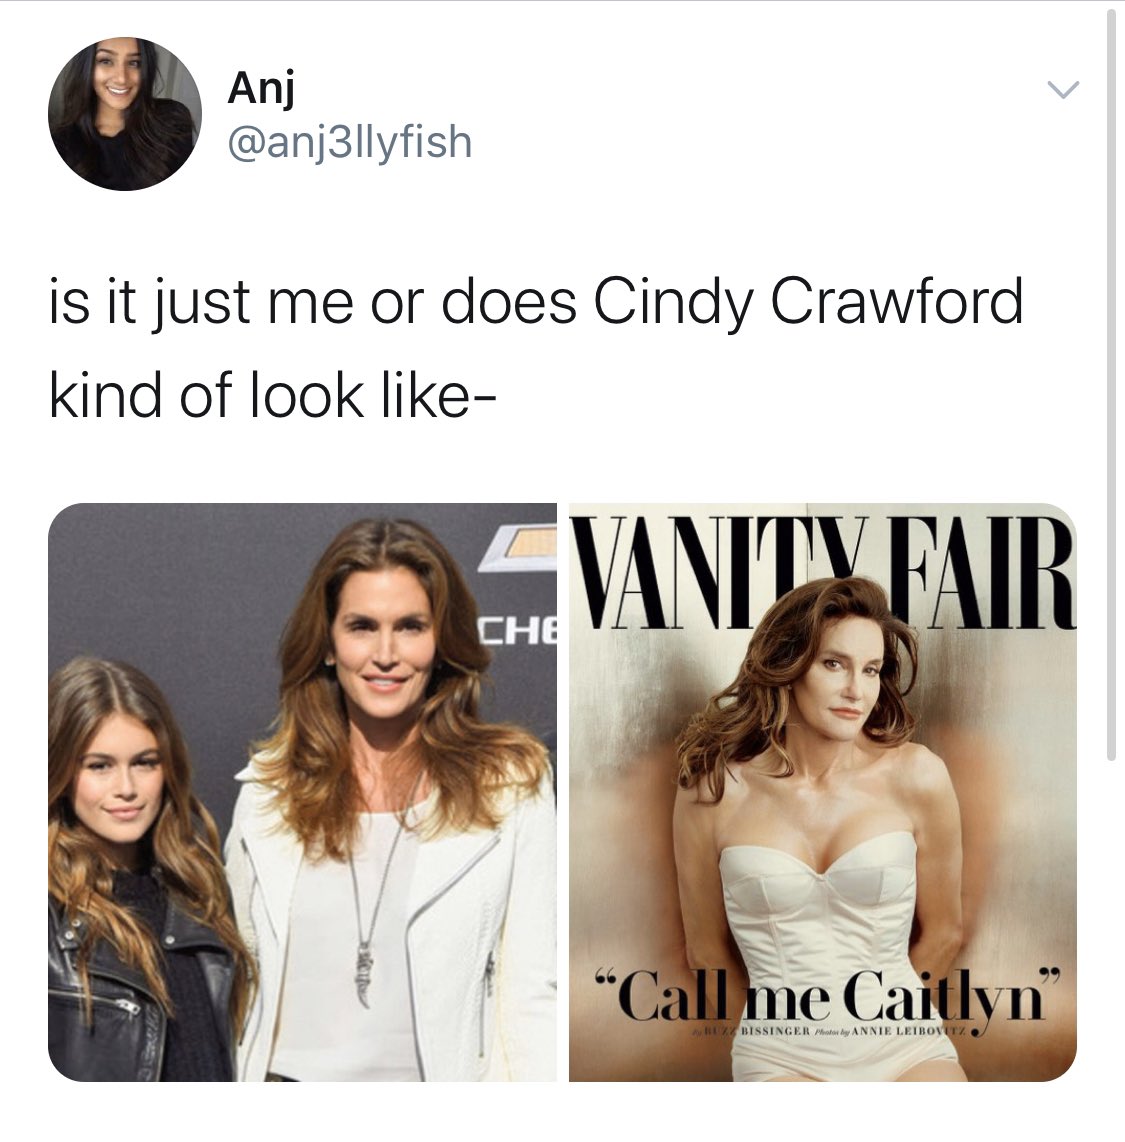 hey, I was unintentionally hurtful in this thread and I want to explain why, take responsibility for it and apologize. I said here that Cindy and Caitlyn look alike, which isn’t inherently problematic until...